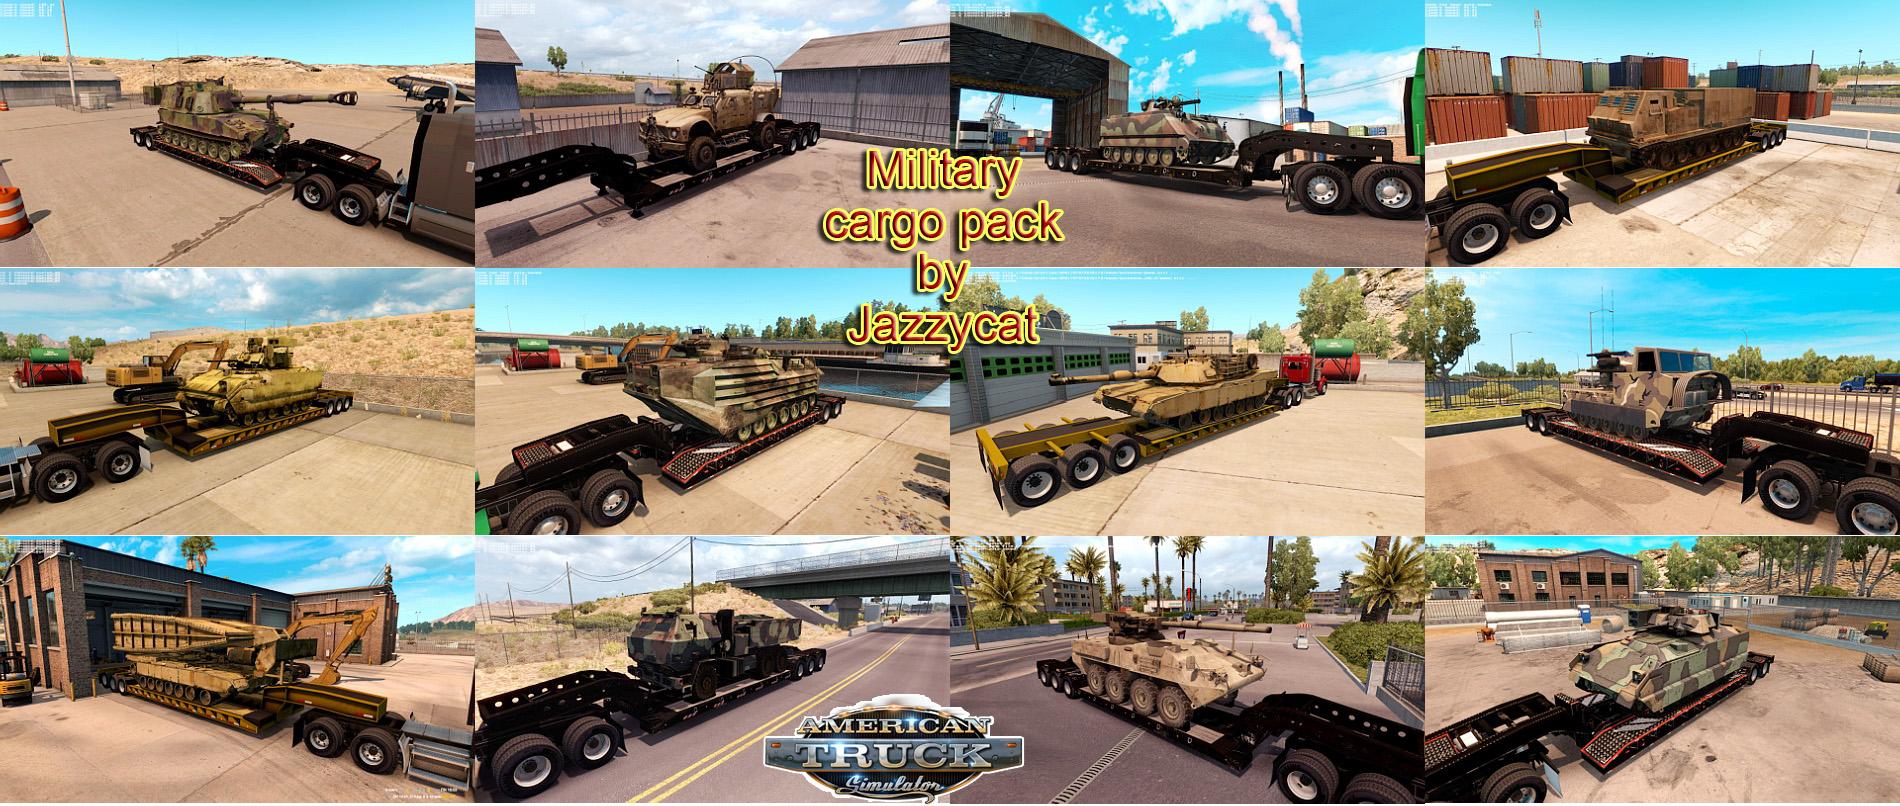 ATS Military Cargo Pack v1.0 by Jazzycat